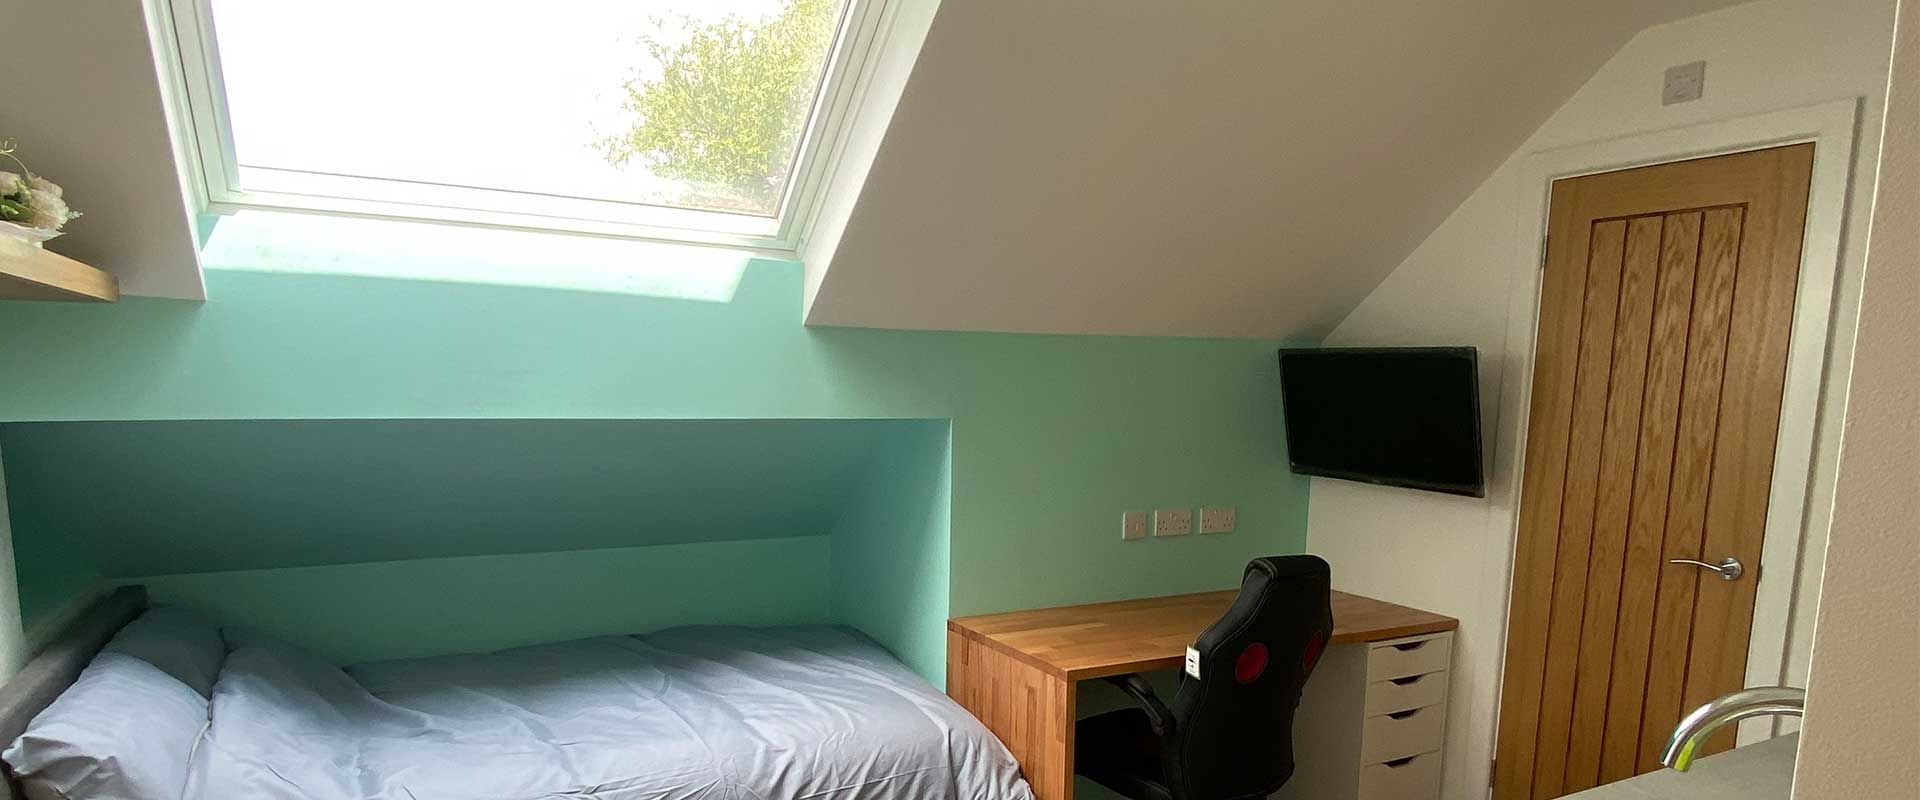 Kingfisher Halls Loughborough student accommodation - The best modern living spaces that have everything you need. 